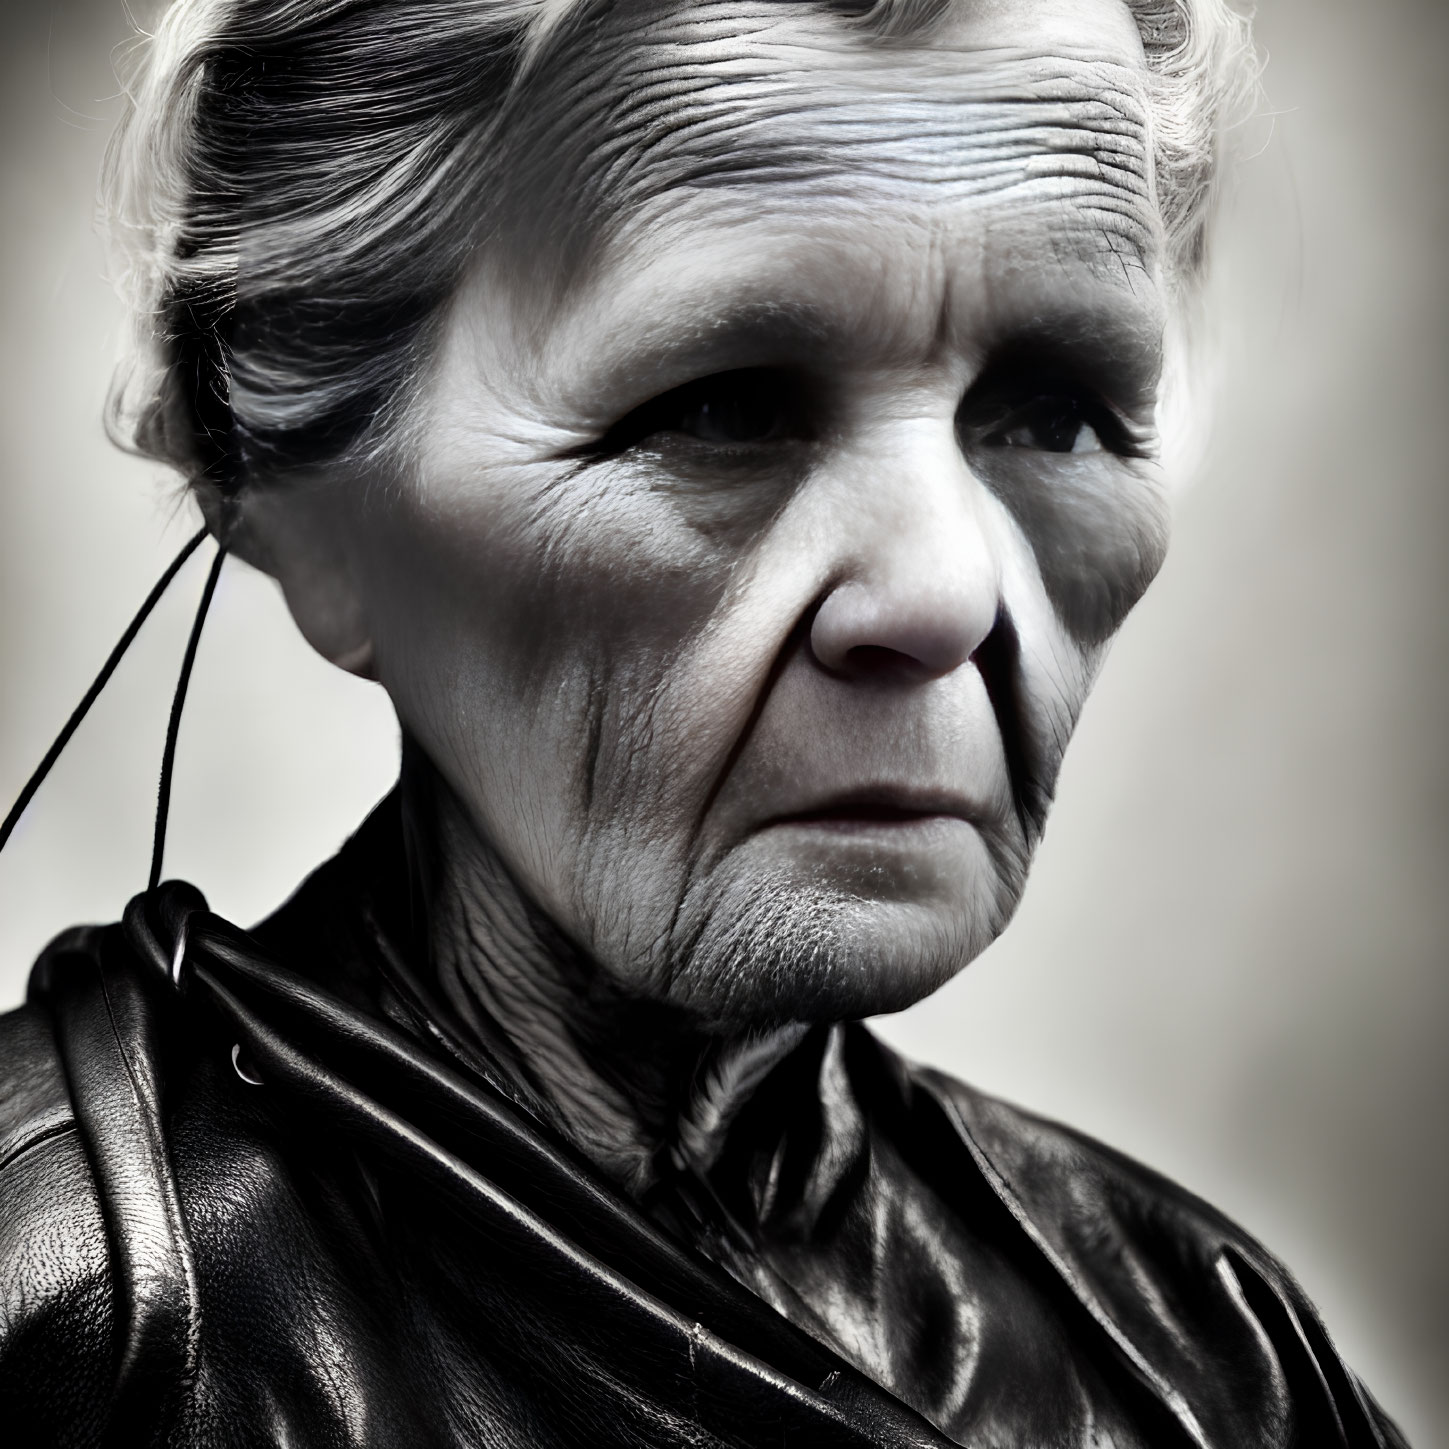 Detailed Close-Up of Elderly Woman in Black Leather Jacket